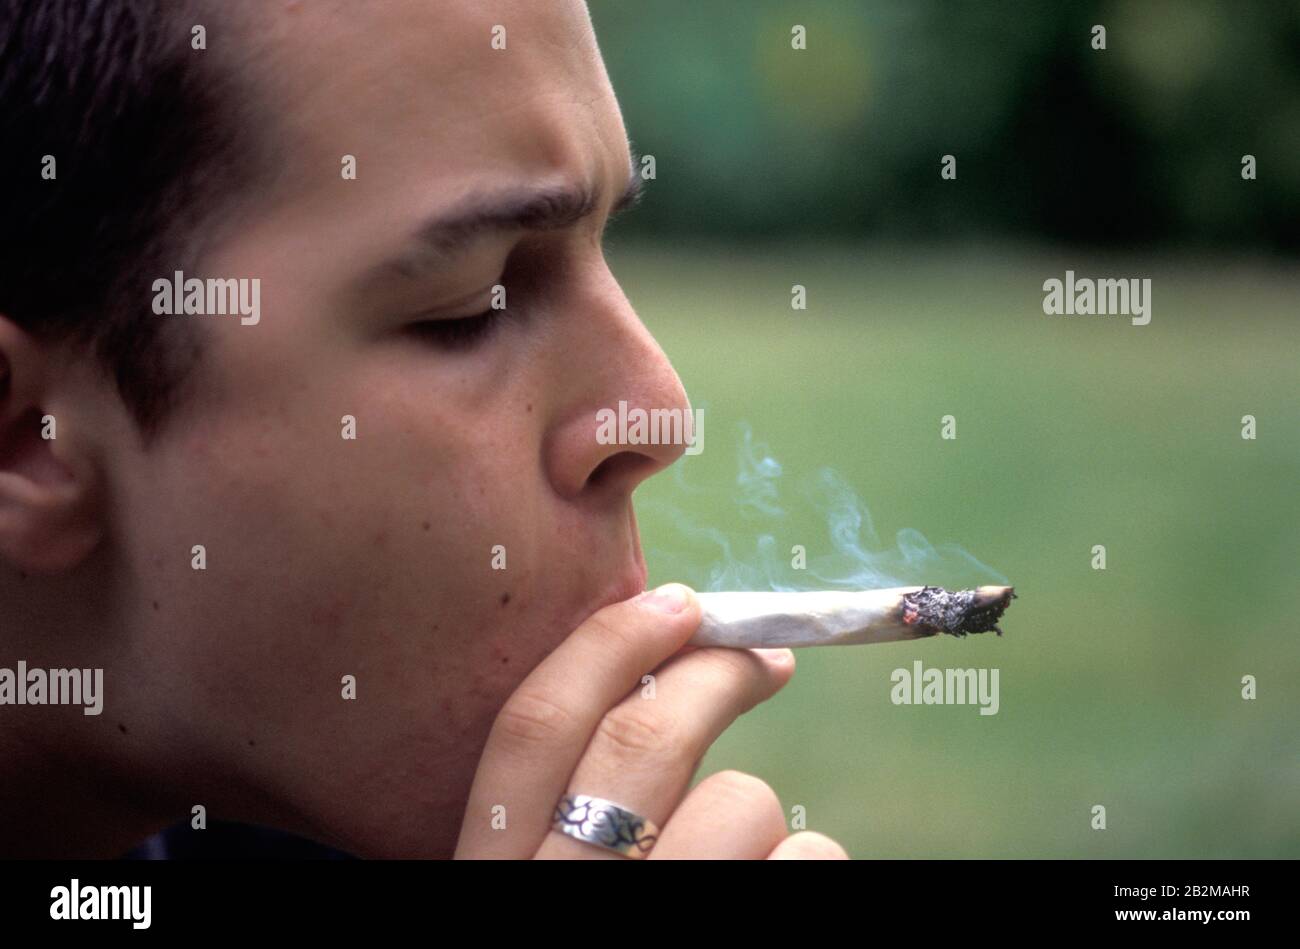 16 year old youth smoking a joint of cannabis; UK. Posed by model Stock Photo